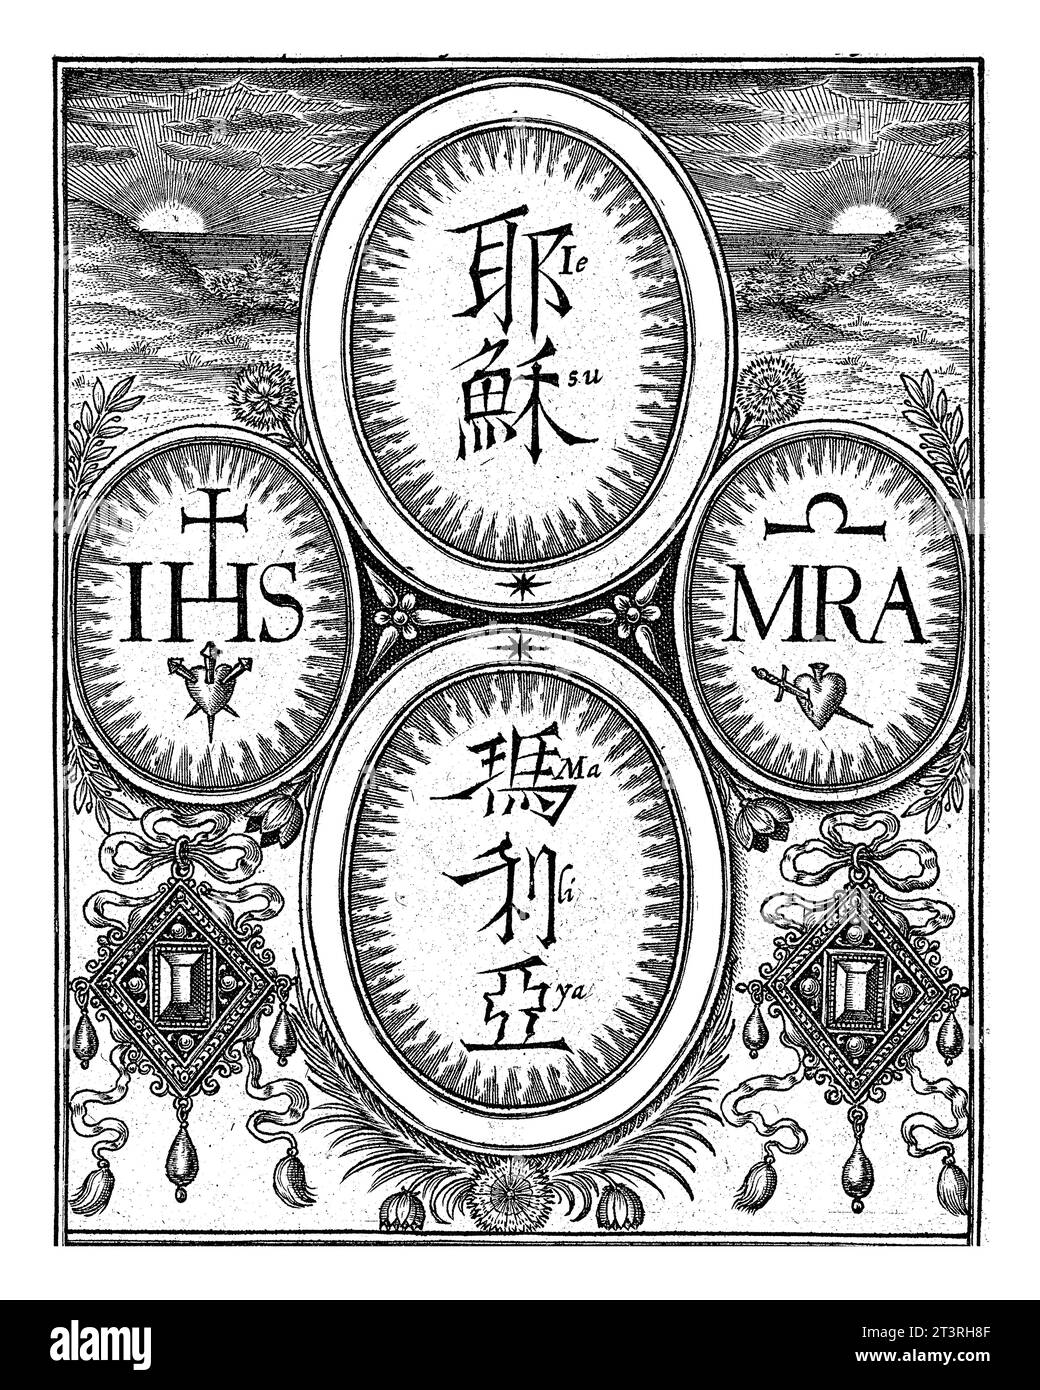 Names of Christ and Mary in Latin and Chinese, Martin Baes, 1614 - 1631 The names of Christ and Mary in four oval medallions in Latin and Chinese. Stock Photo